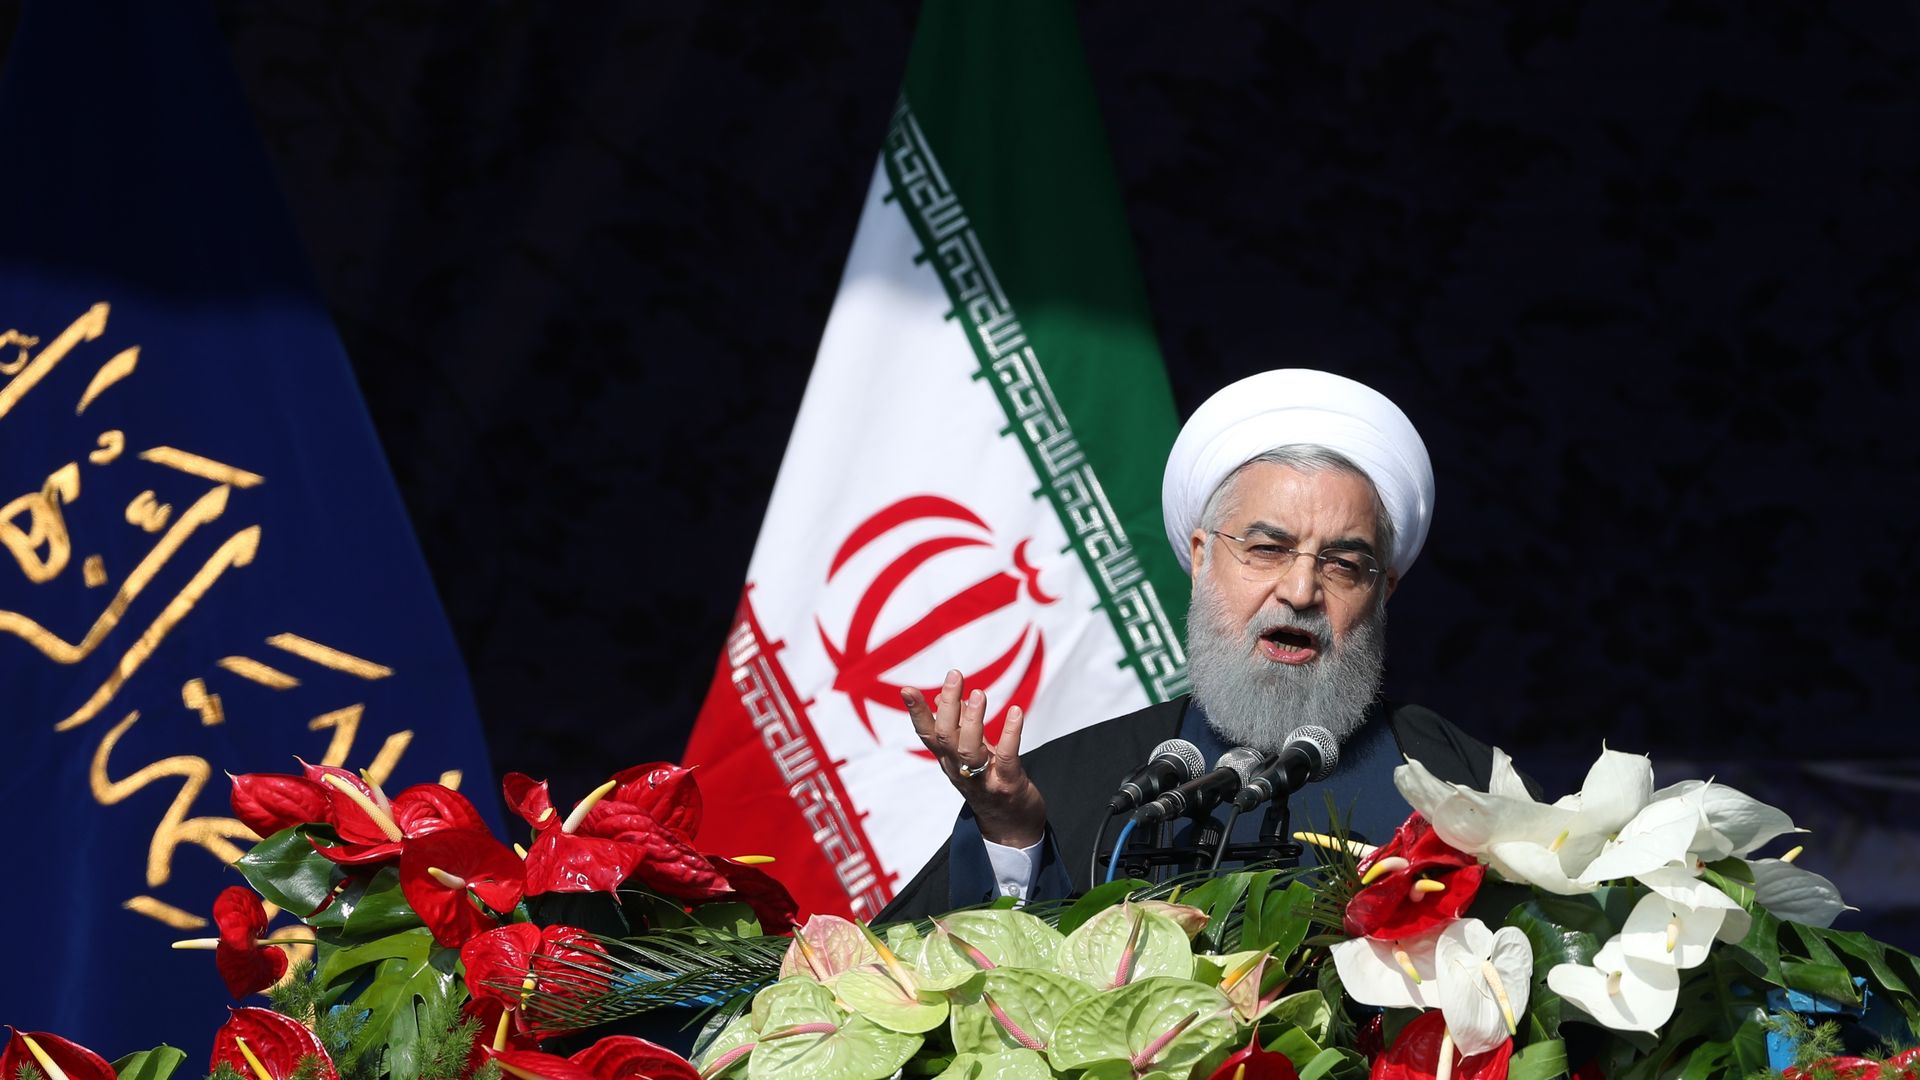  Iranian President Hassan Rouhani delivers a speech during a ceremony to mark the 39th anniversary of the Islamic revolution on February 11, 2018